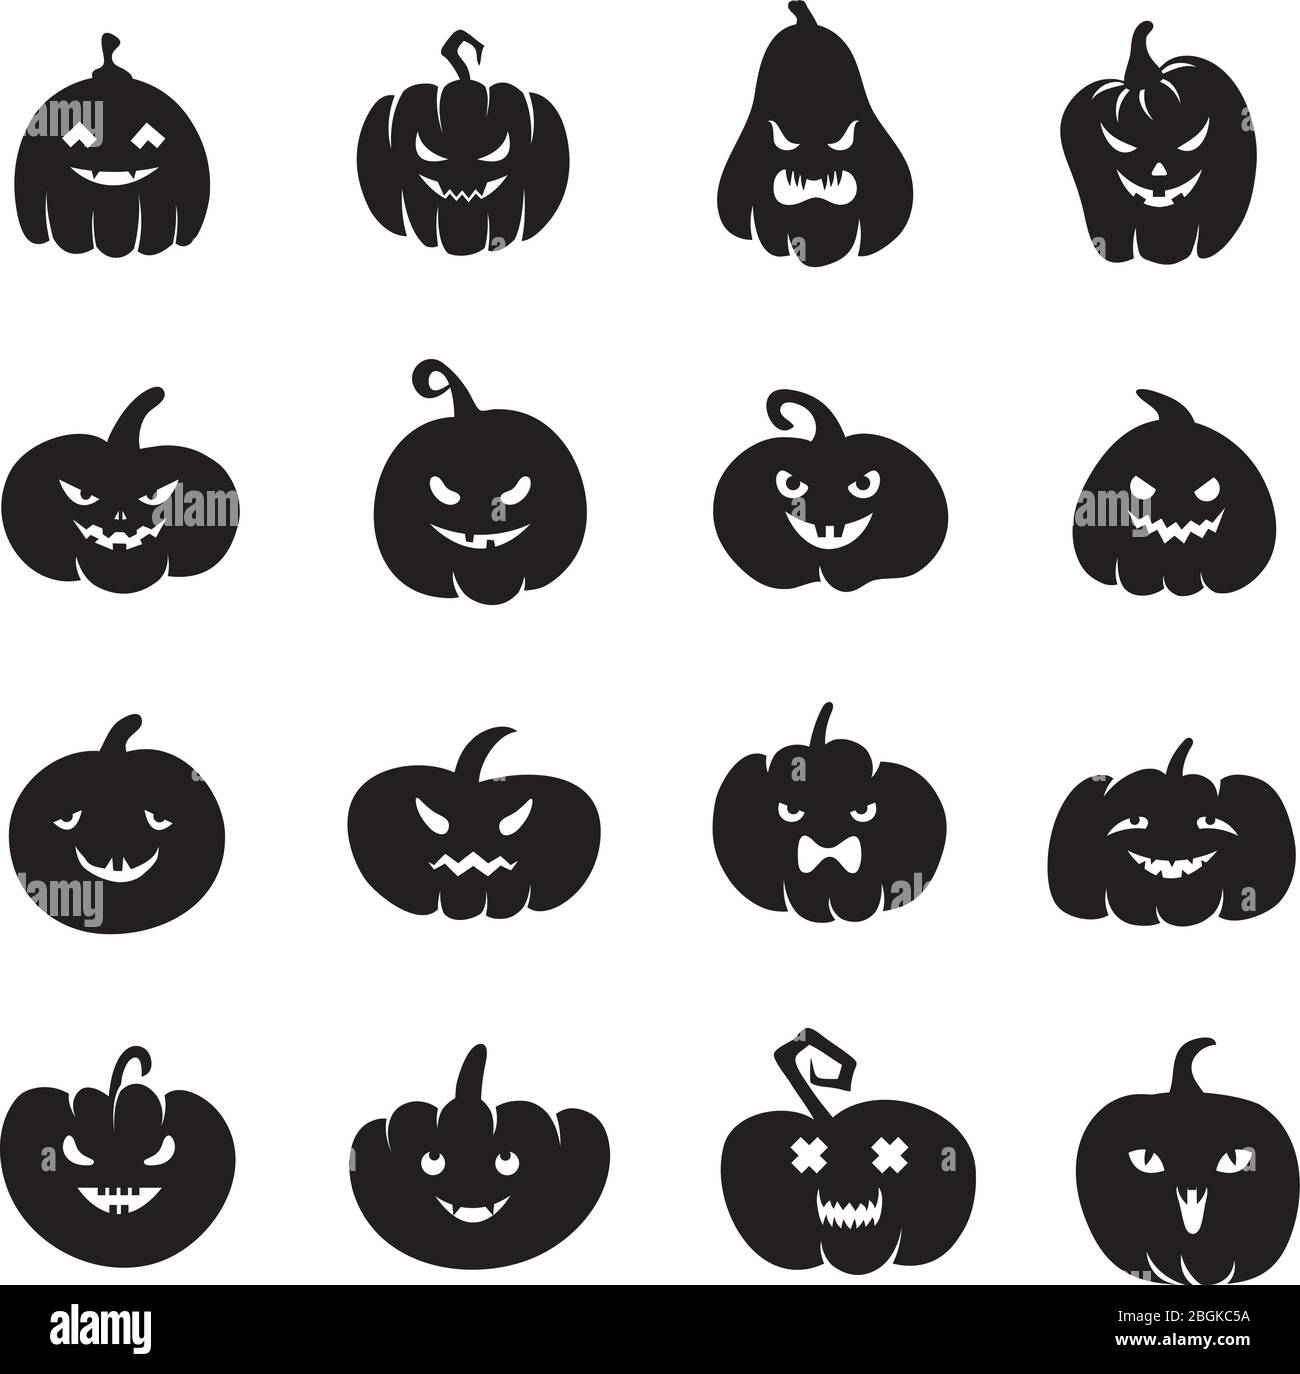 Halloween pumpkin faces. Scary pumpkins bloody with evil smile and eyes ...